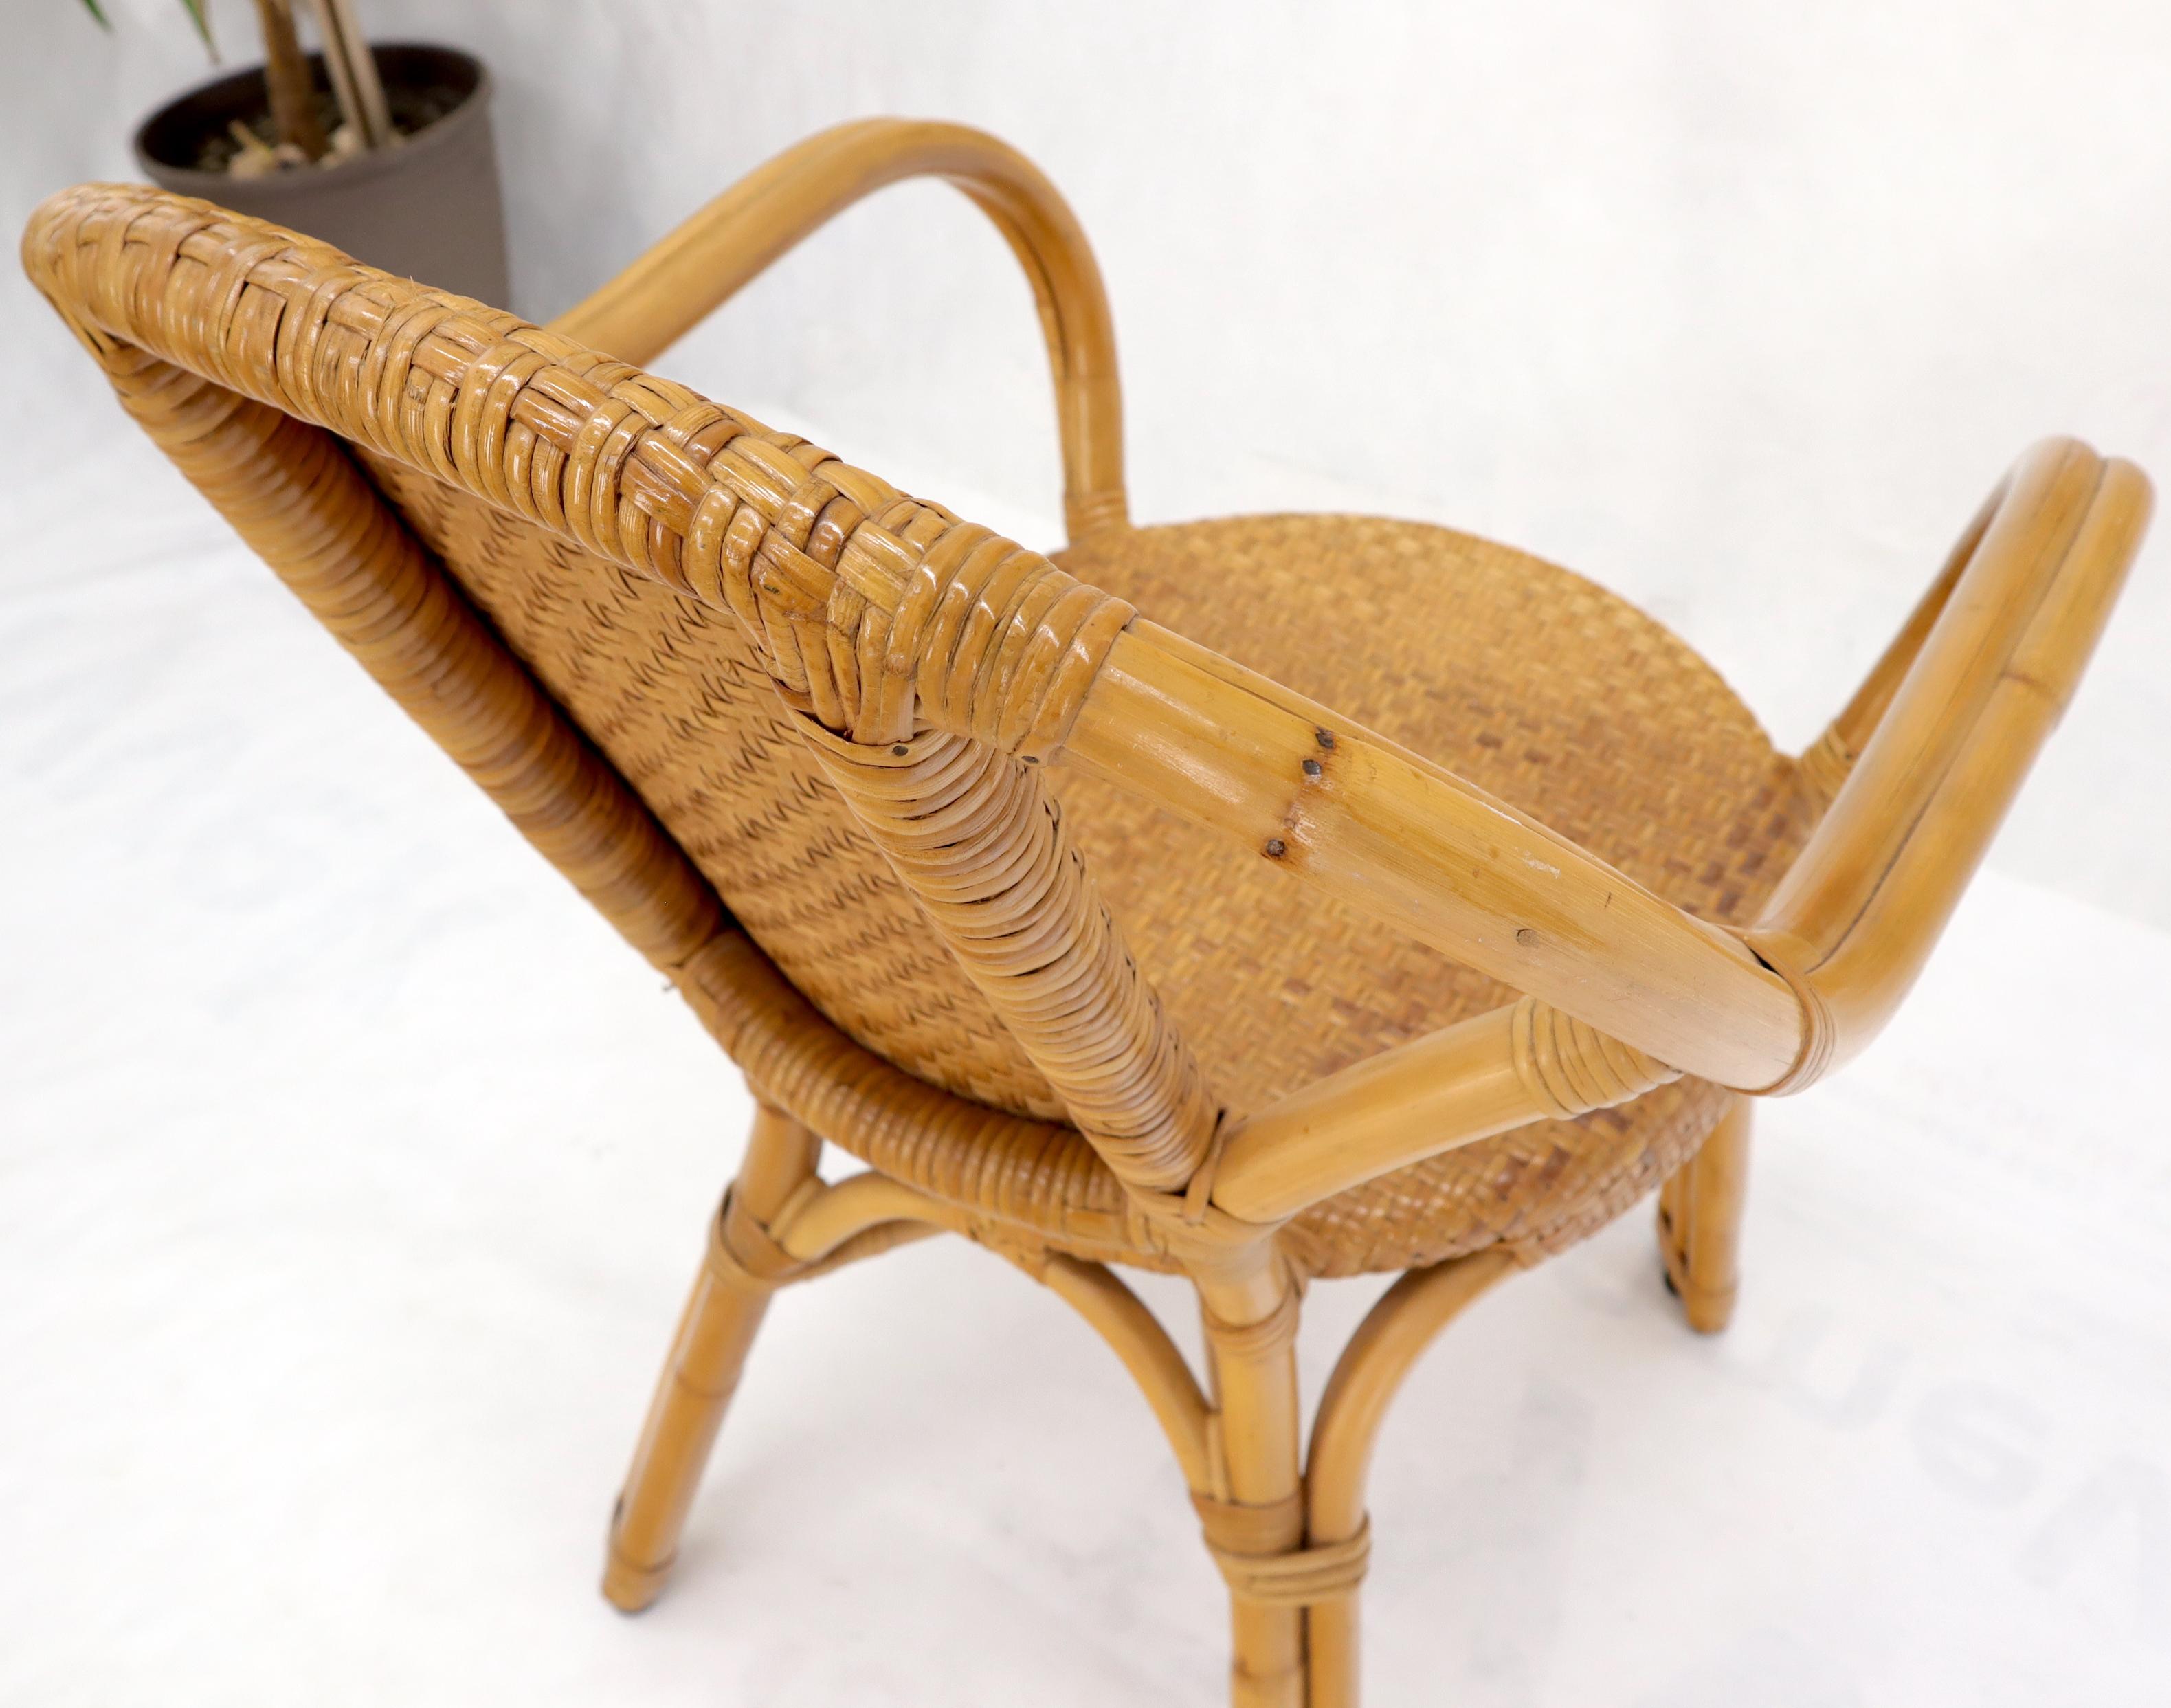 Bamboo Bendt bamboo rattan desk arm chair For Sale